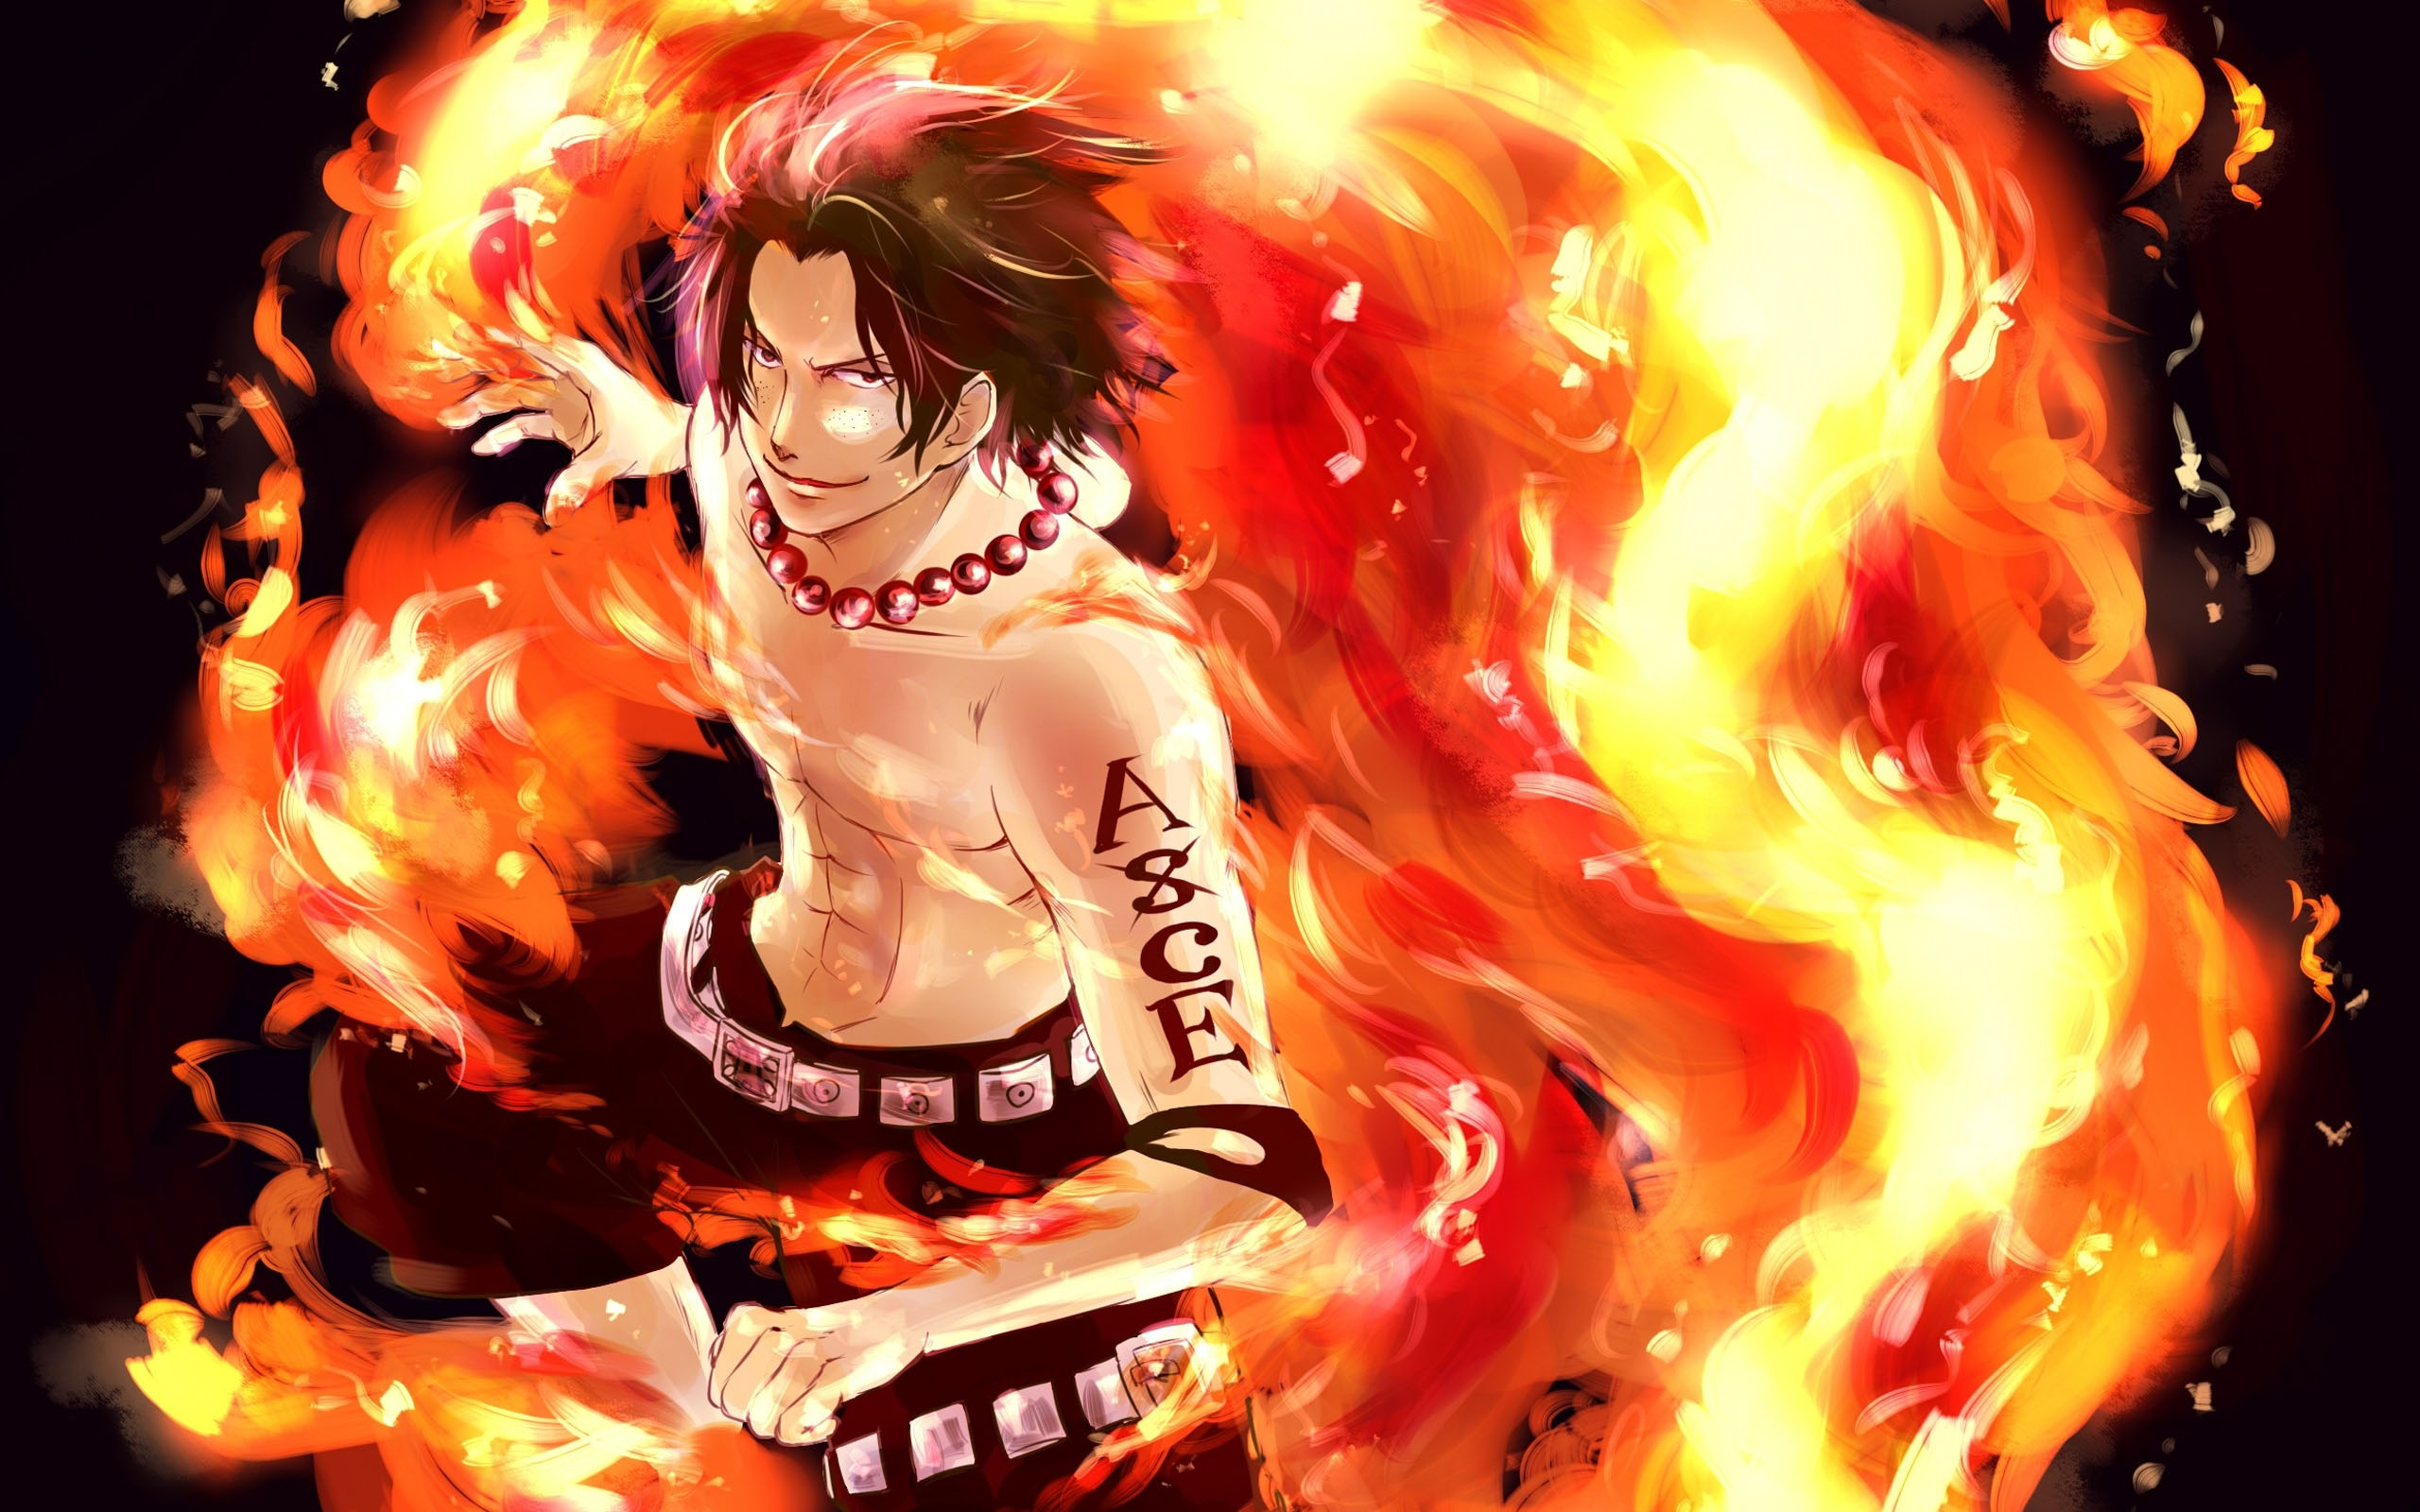 One Piece Ace Wallpapers Downloads A15- Free cool beautiful 3d manga anime desktop mobile phone Backgrounds wallpapers downloads